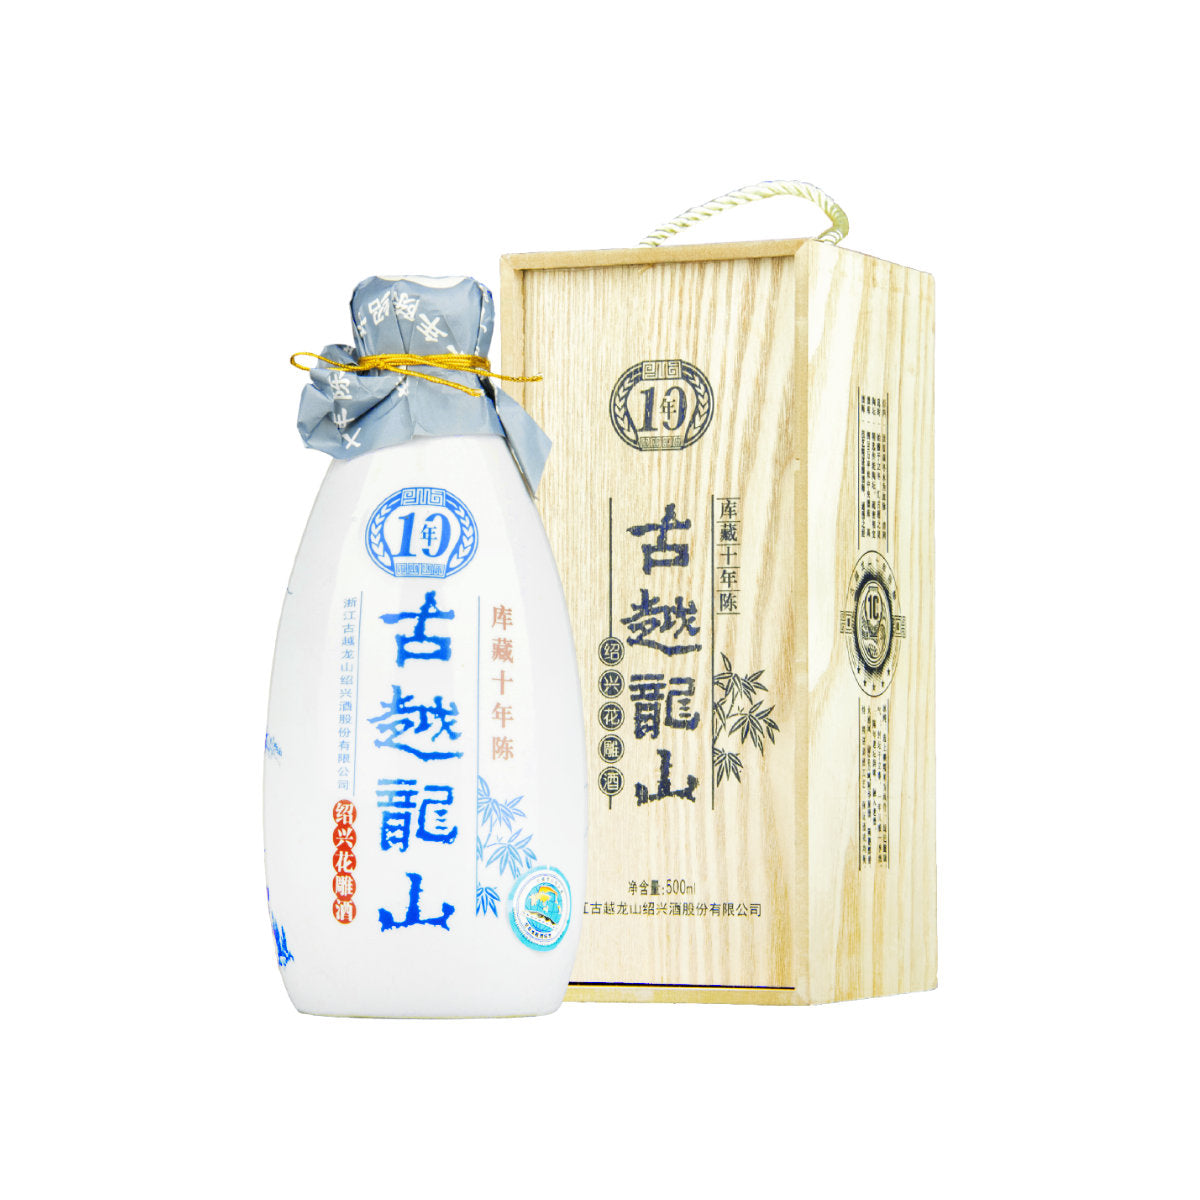 10 Year Old Cellar Select Shaoxing Rice Wine 500mL – Shaoxing Wine